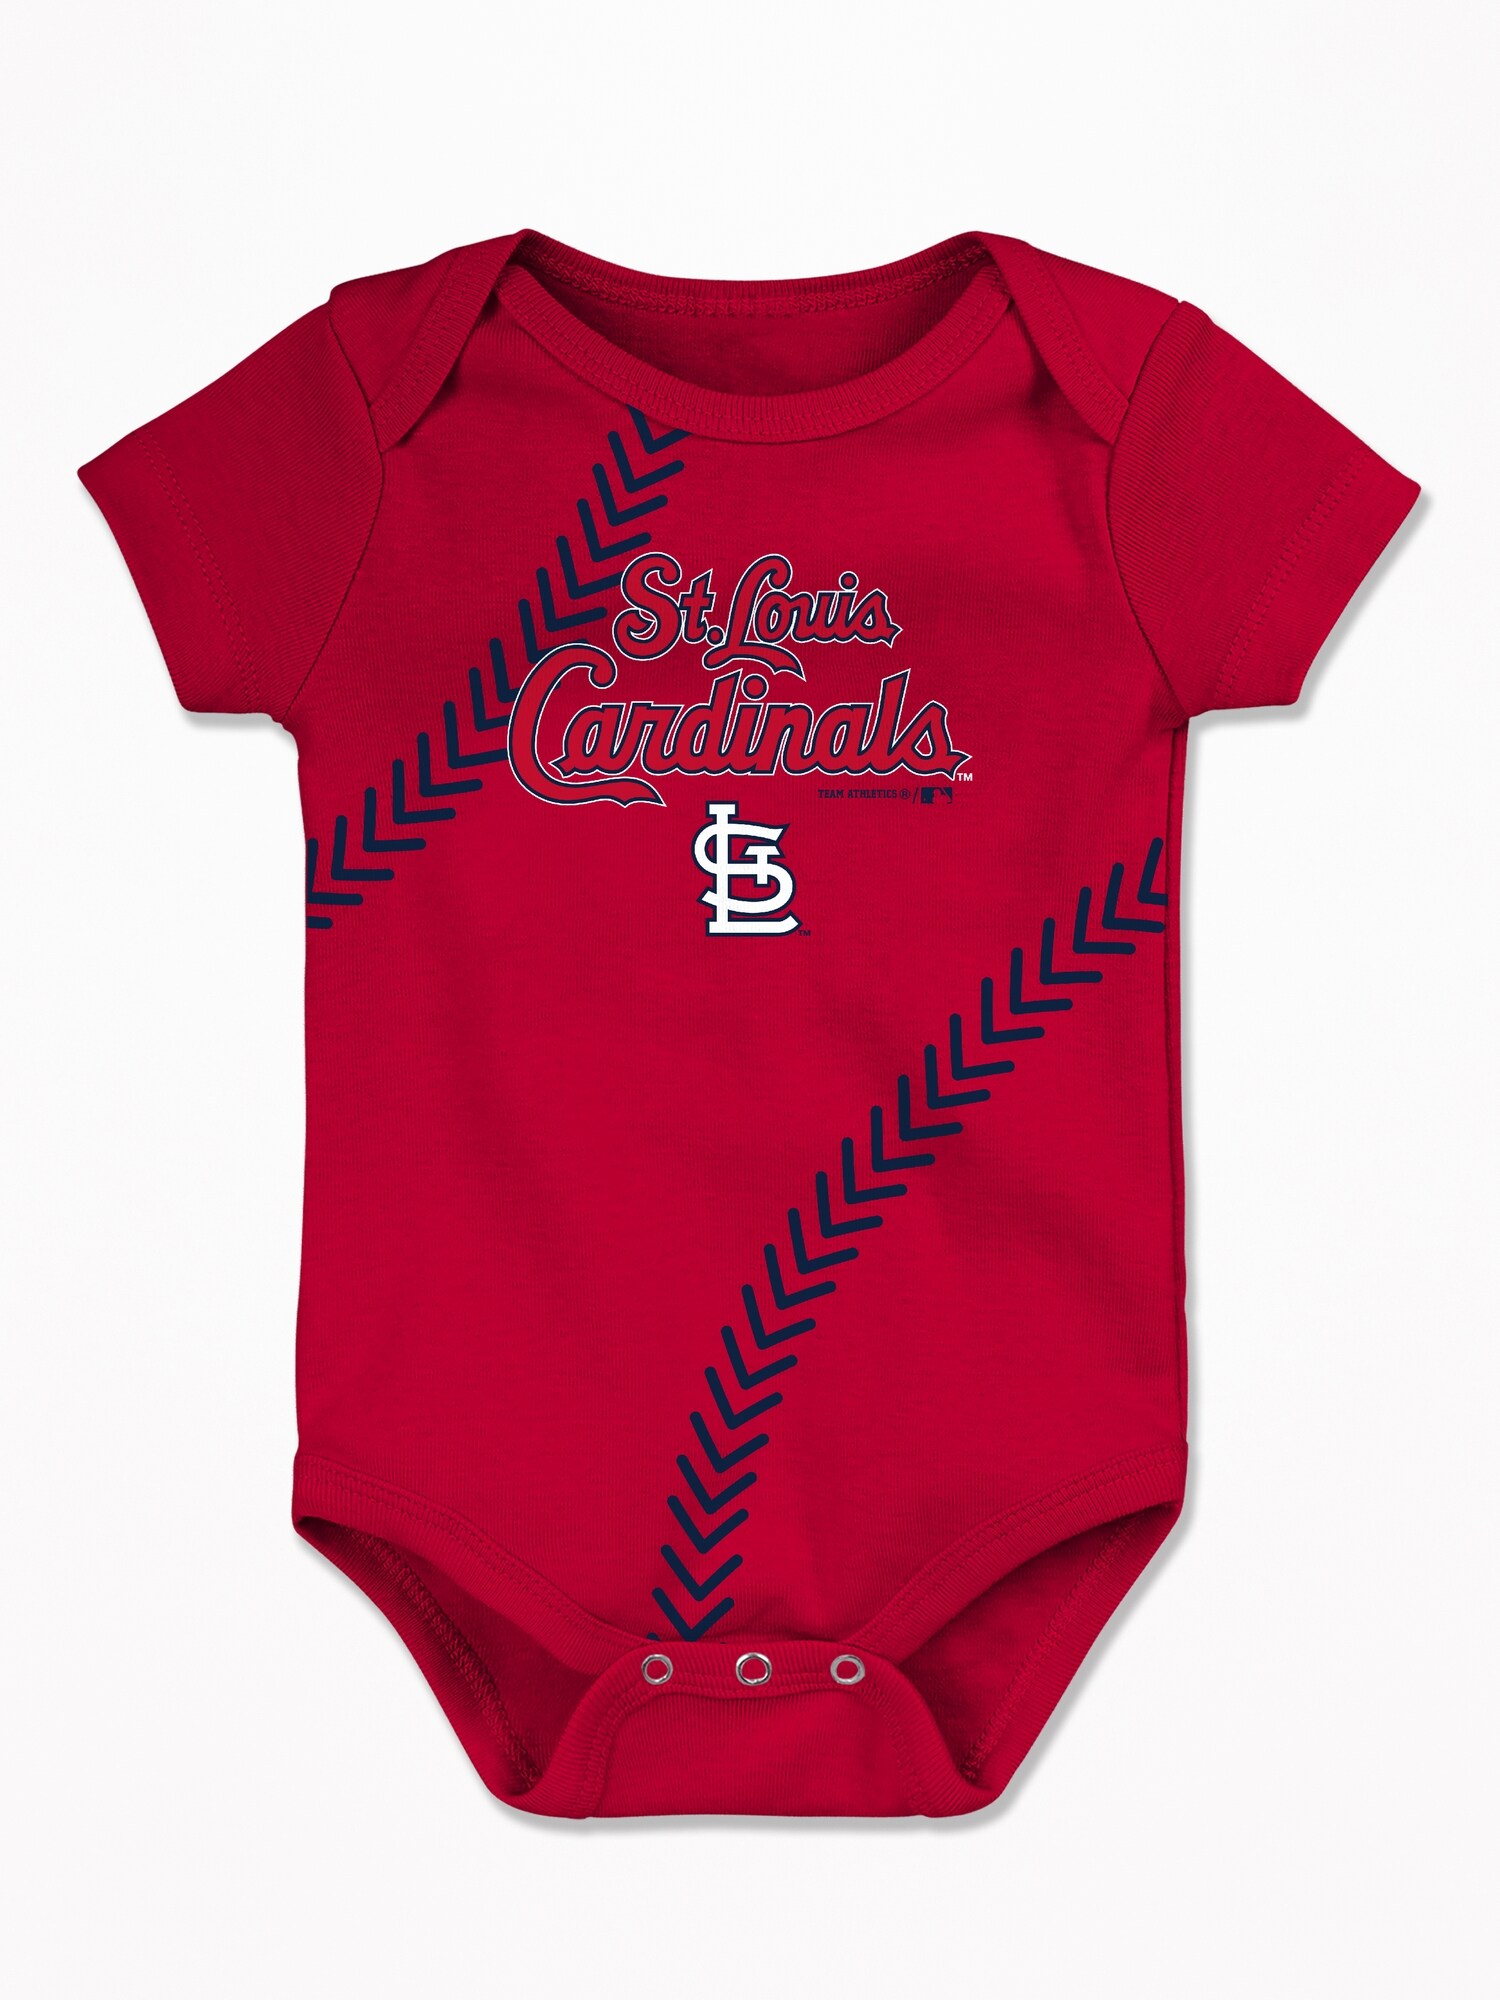 MLB St. Louis Cardinals Red Full Zipper Frnt Long Slv Hoodie Baby USED 18  Months